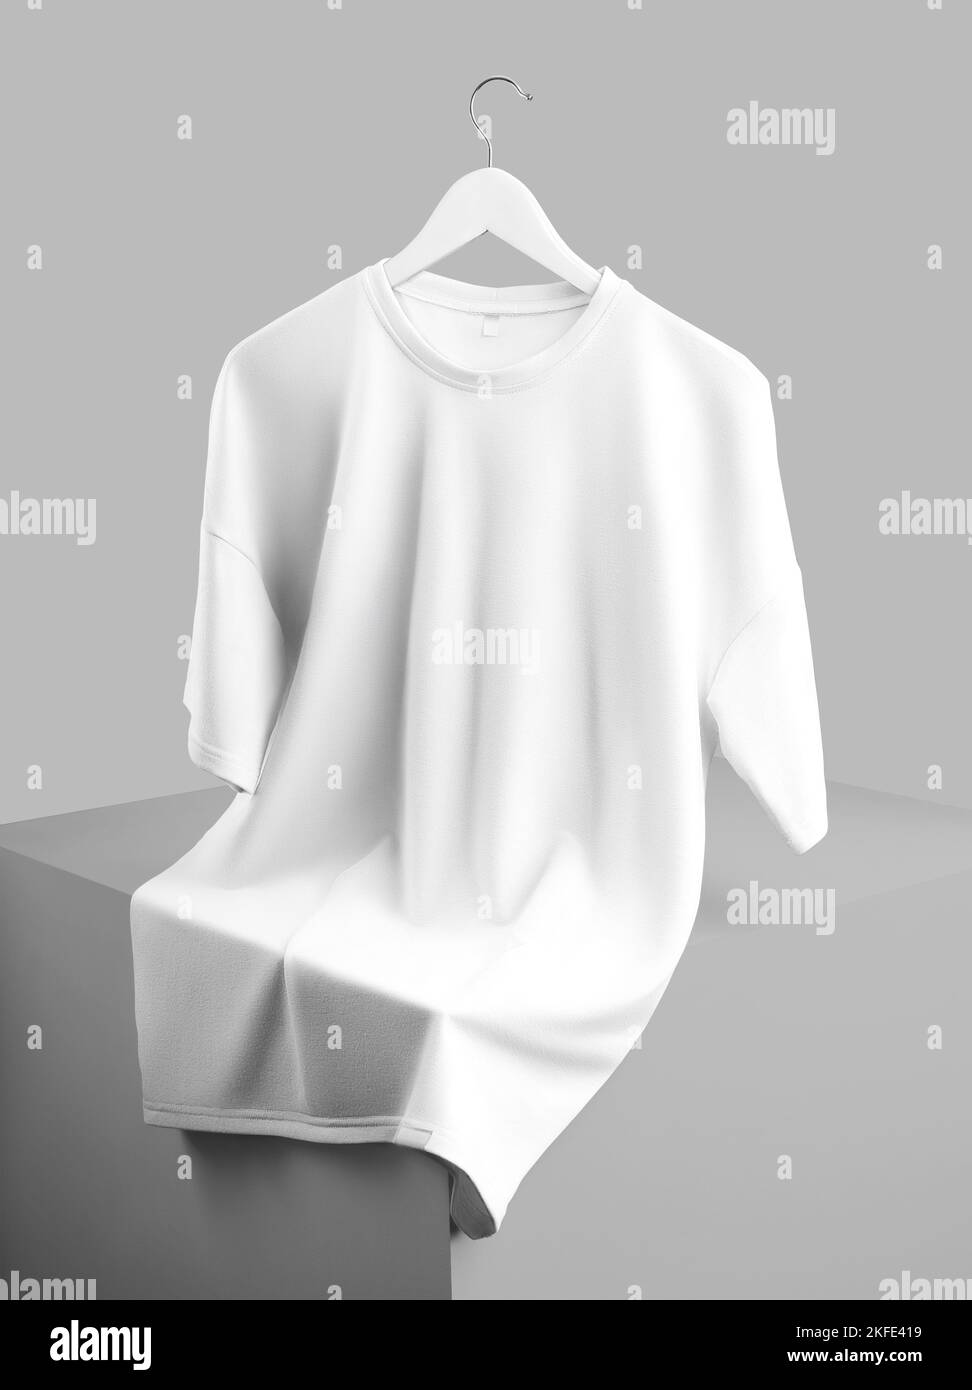 Mockup of an oversized white t-shirt hanging on a hanger, laid out over a cube, front view, isolated on background. Blank fashion apparel template wit Stock Photo